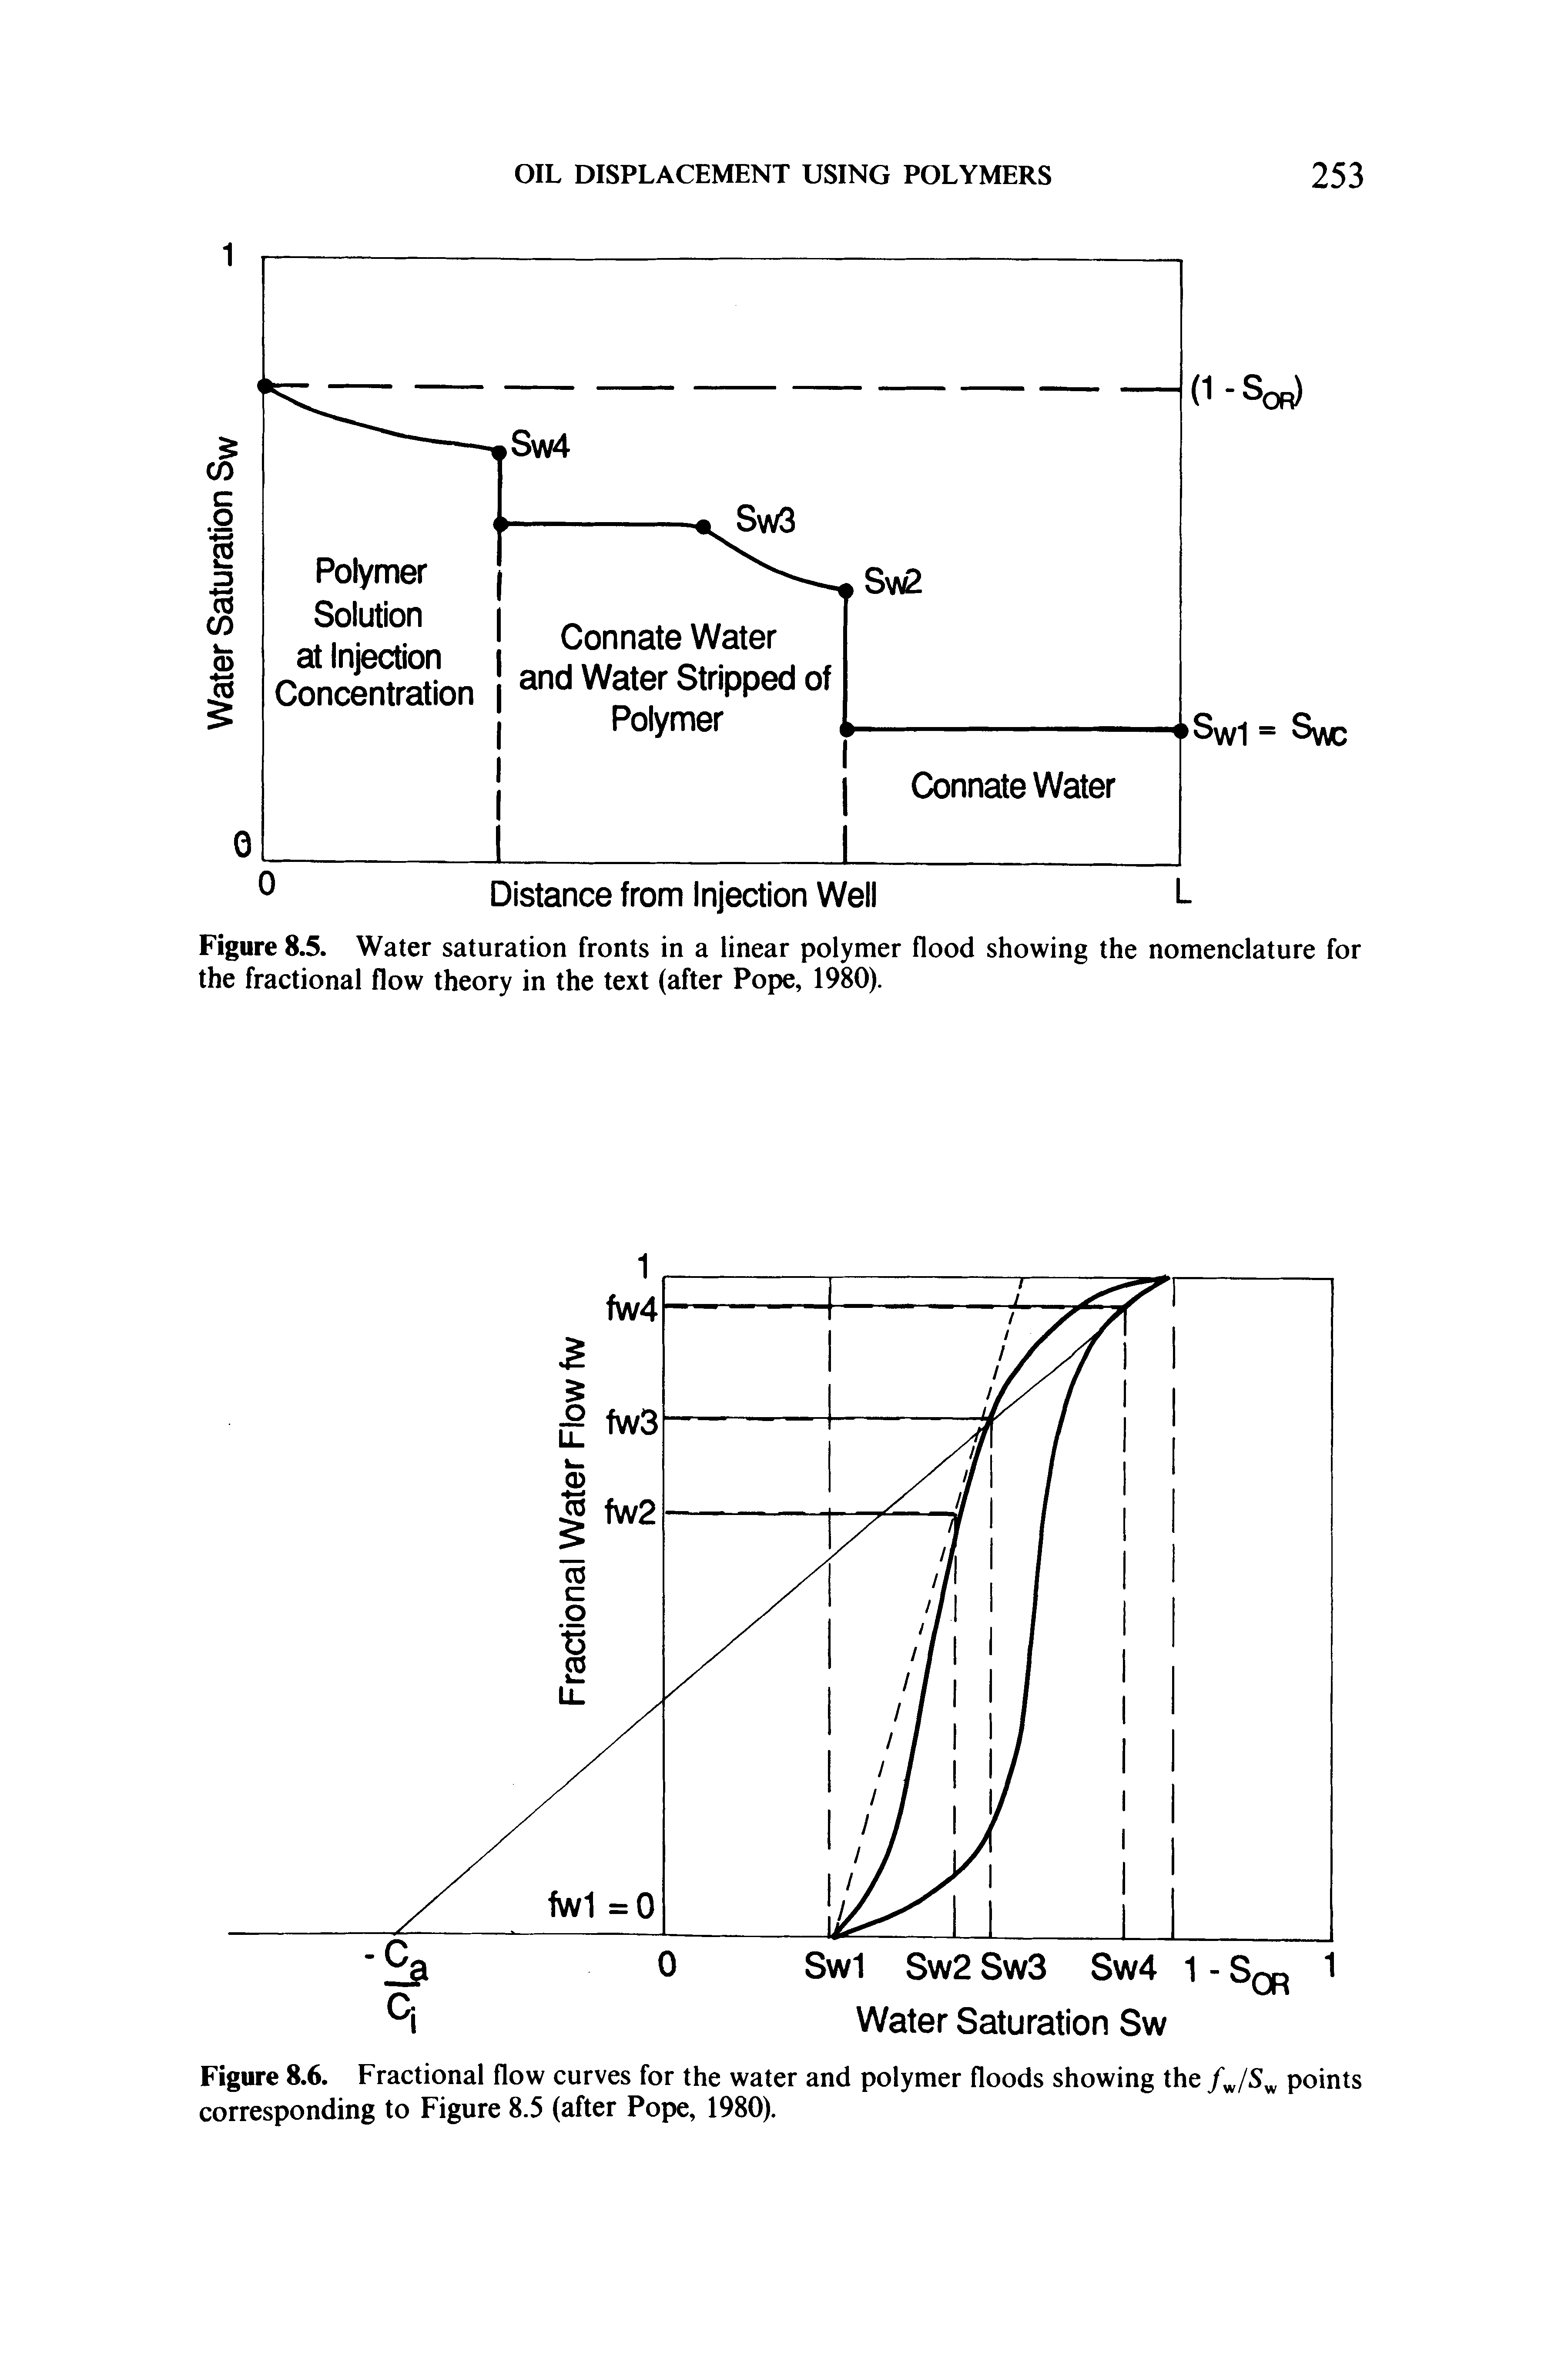 Figure 8.5. Water saturation fronts in a linear polymer flood showing the nomenclature for the fractional flow theory in the text (after Pope, 1980).